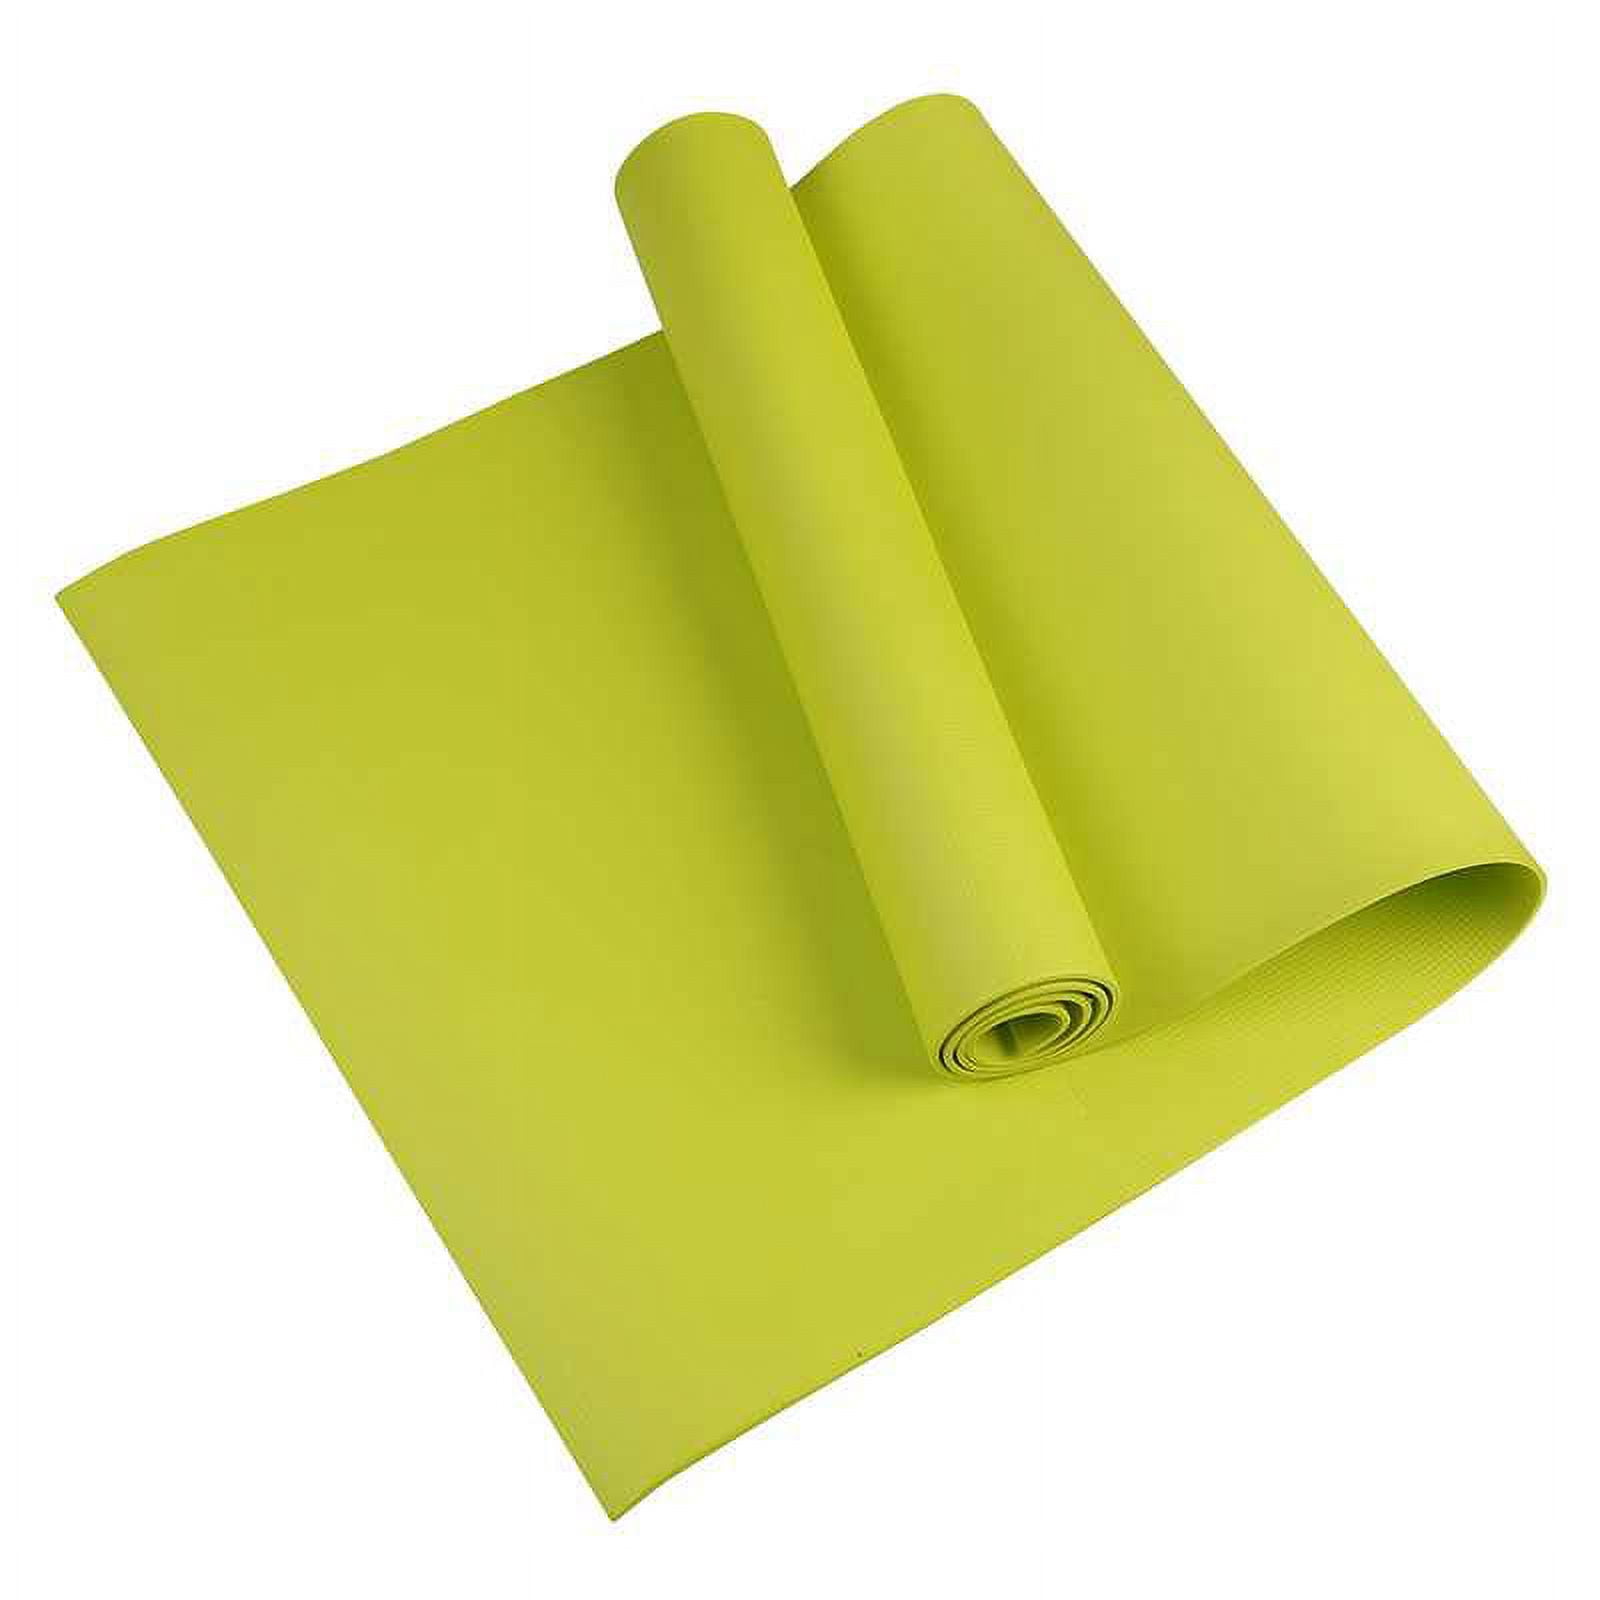 Millenti Yoga Mat Gym Mats - 6mm Thick Suede Texture Material